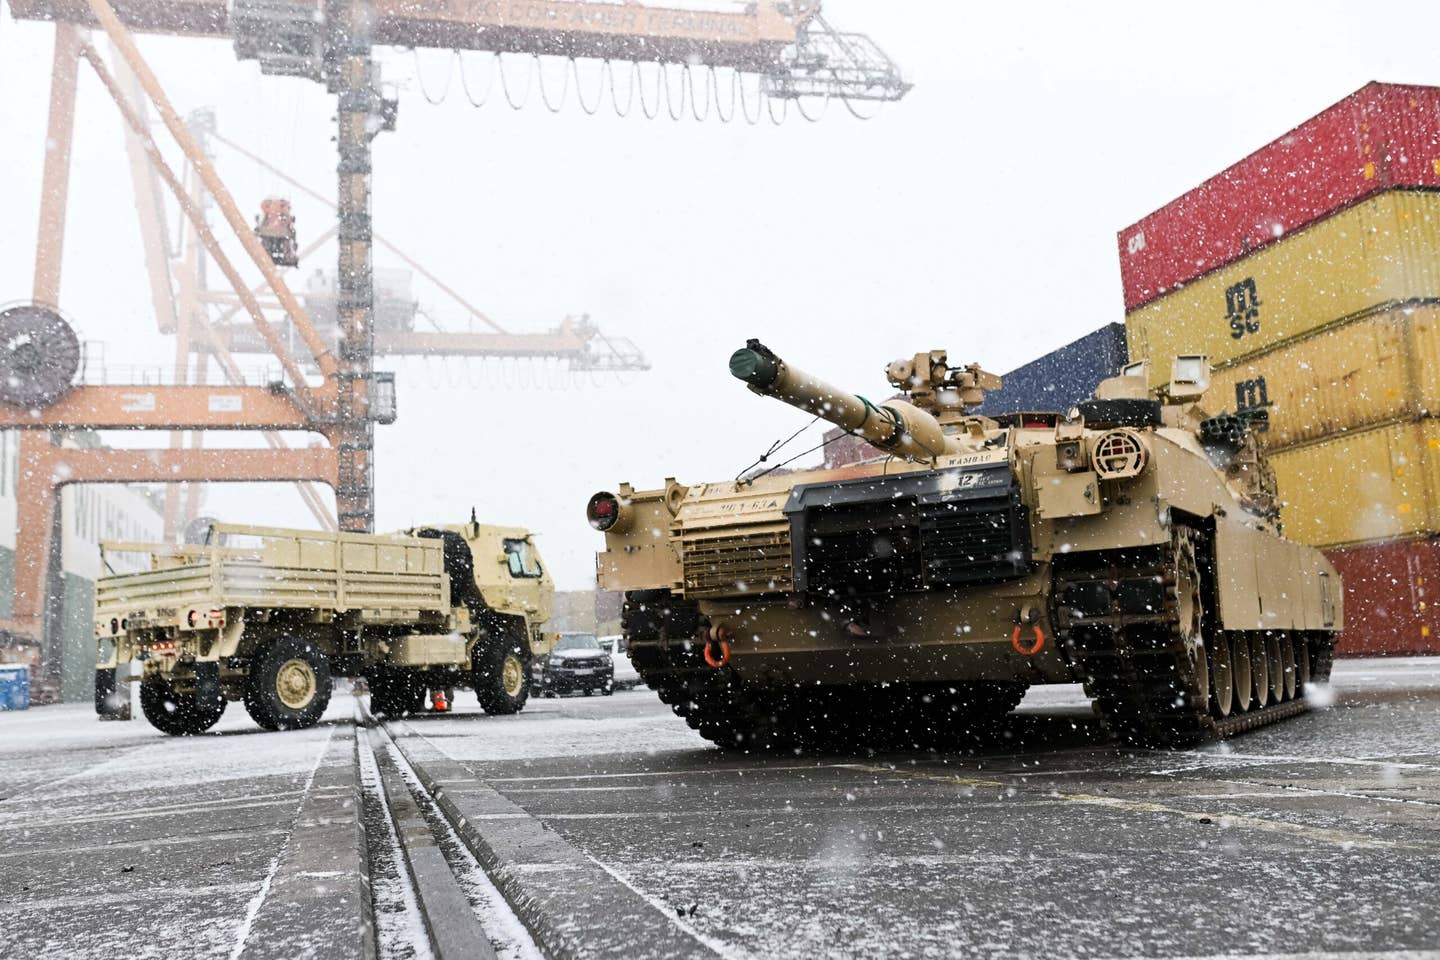 A M1A2 Abrams battle tank of the U.S. army that will be used for military exercises by the 2nd Armored Brigade Combat Team, is unloaded at the Baltic Container Terminal in Gdynia on December 3, 2022. (Photo by MATEUSZ SLODKOWSKI / AFP) (Photo by MATEUSZ SLODKOWSKI/AFP via Getty Images)